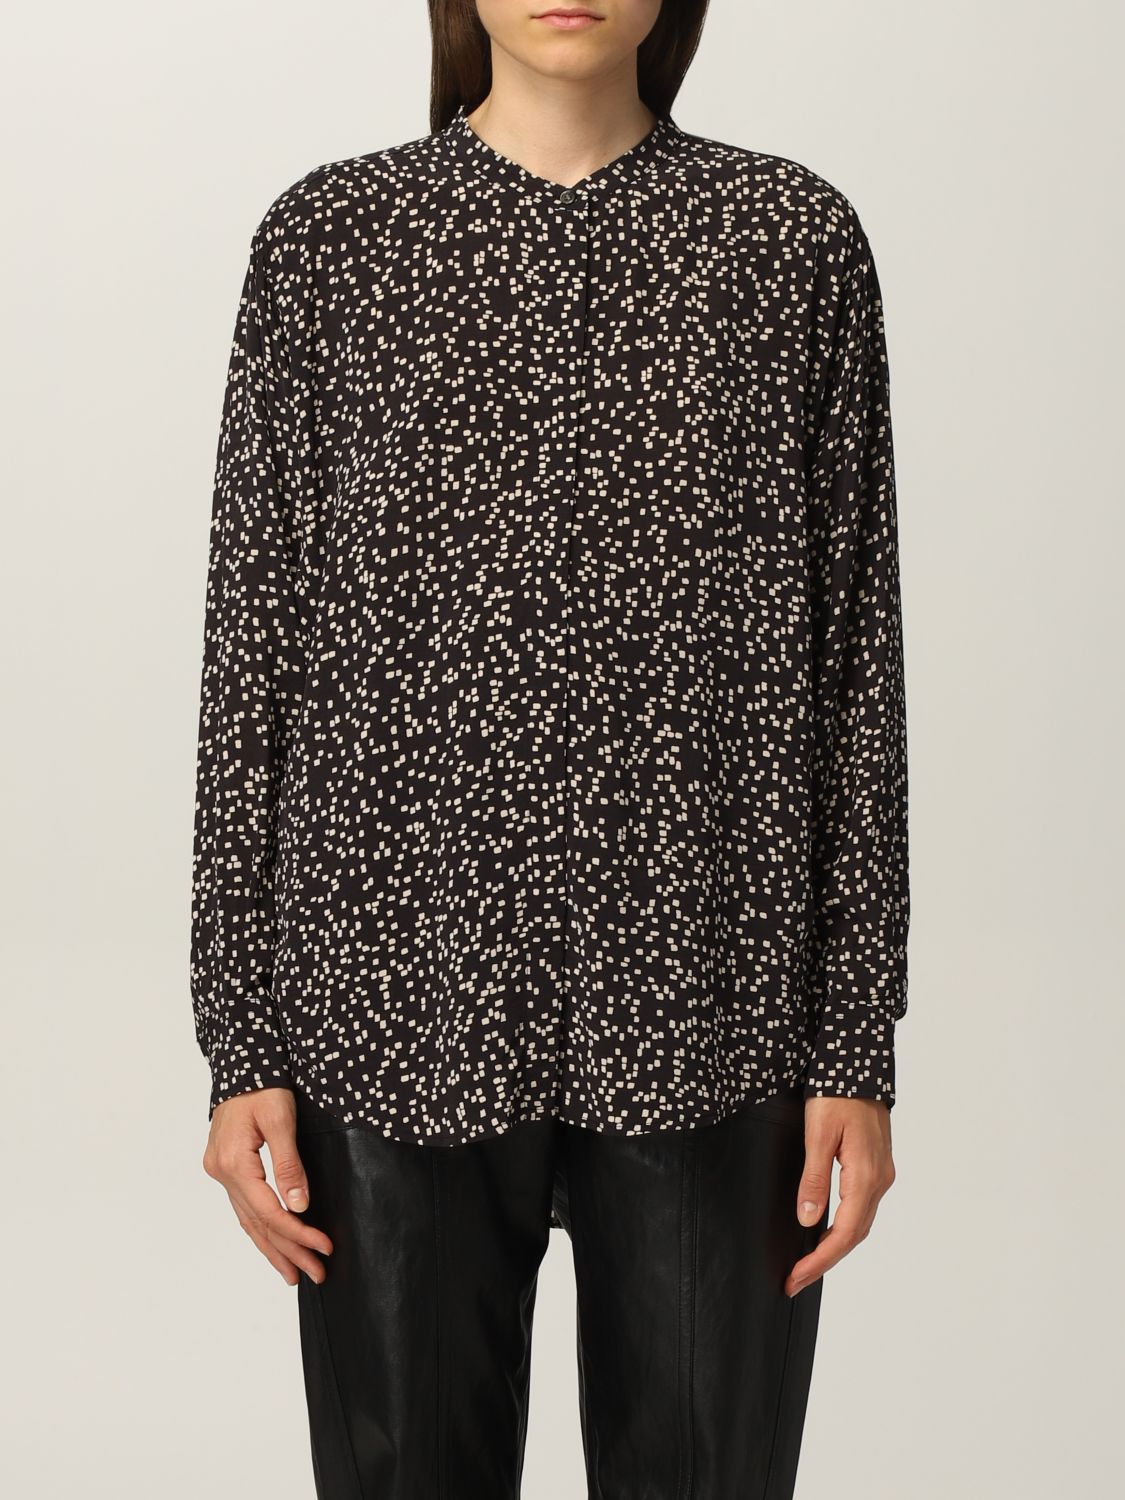 hver for sig Lager frokost ISABEL MARANT ETOILE: cotton shirt with all over print | Shirt Isabel Marant  Etoile Women Black | Shirt Isabel Marant Etoile CH062821A022E GIGLIO.COM